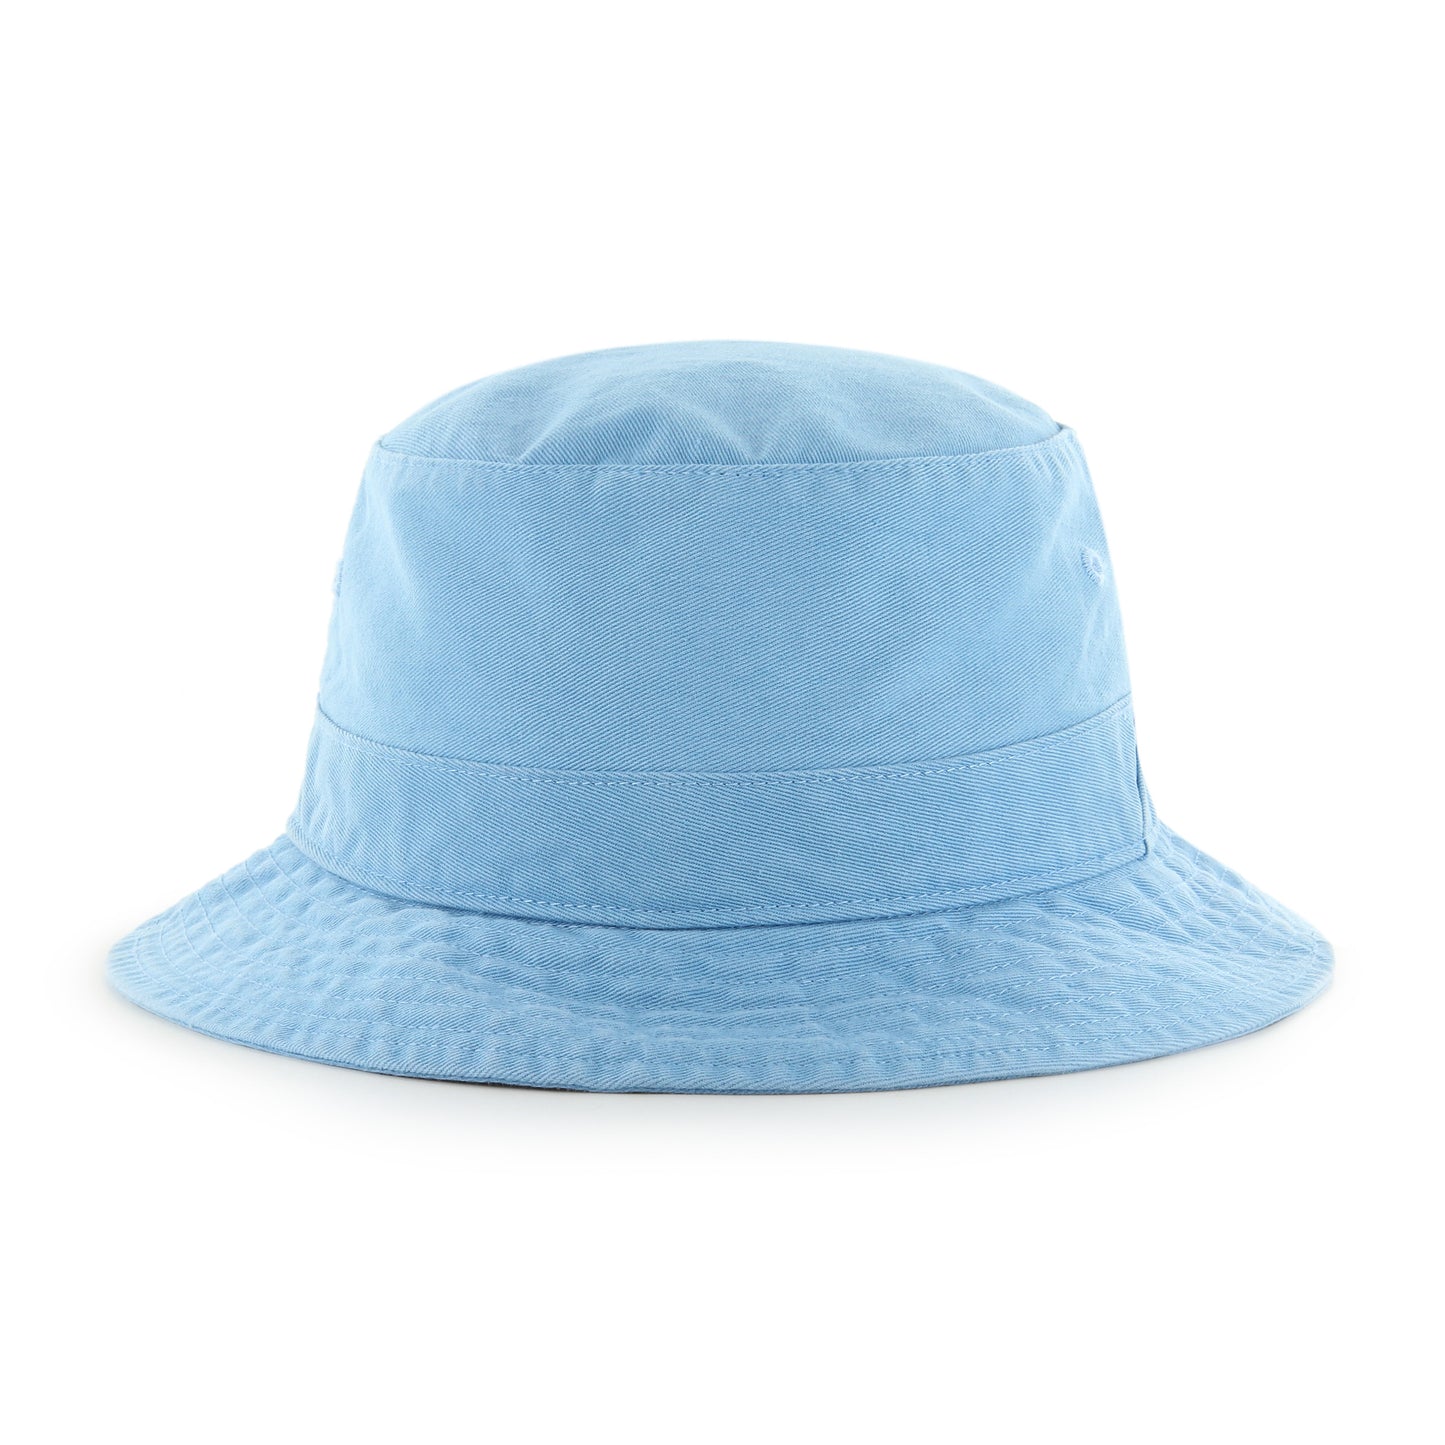 Chicago Cubs Columbia Blue '47 Bucket Hat